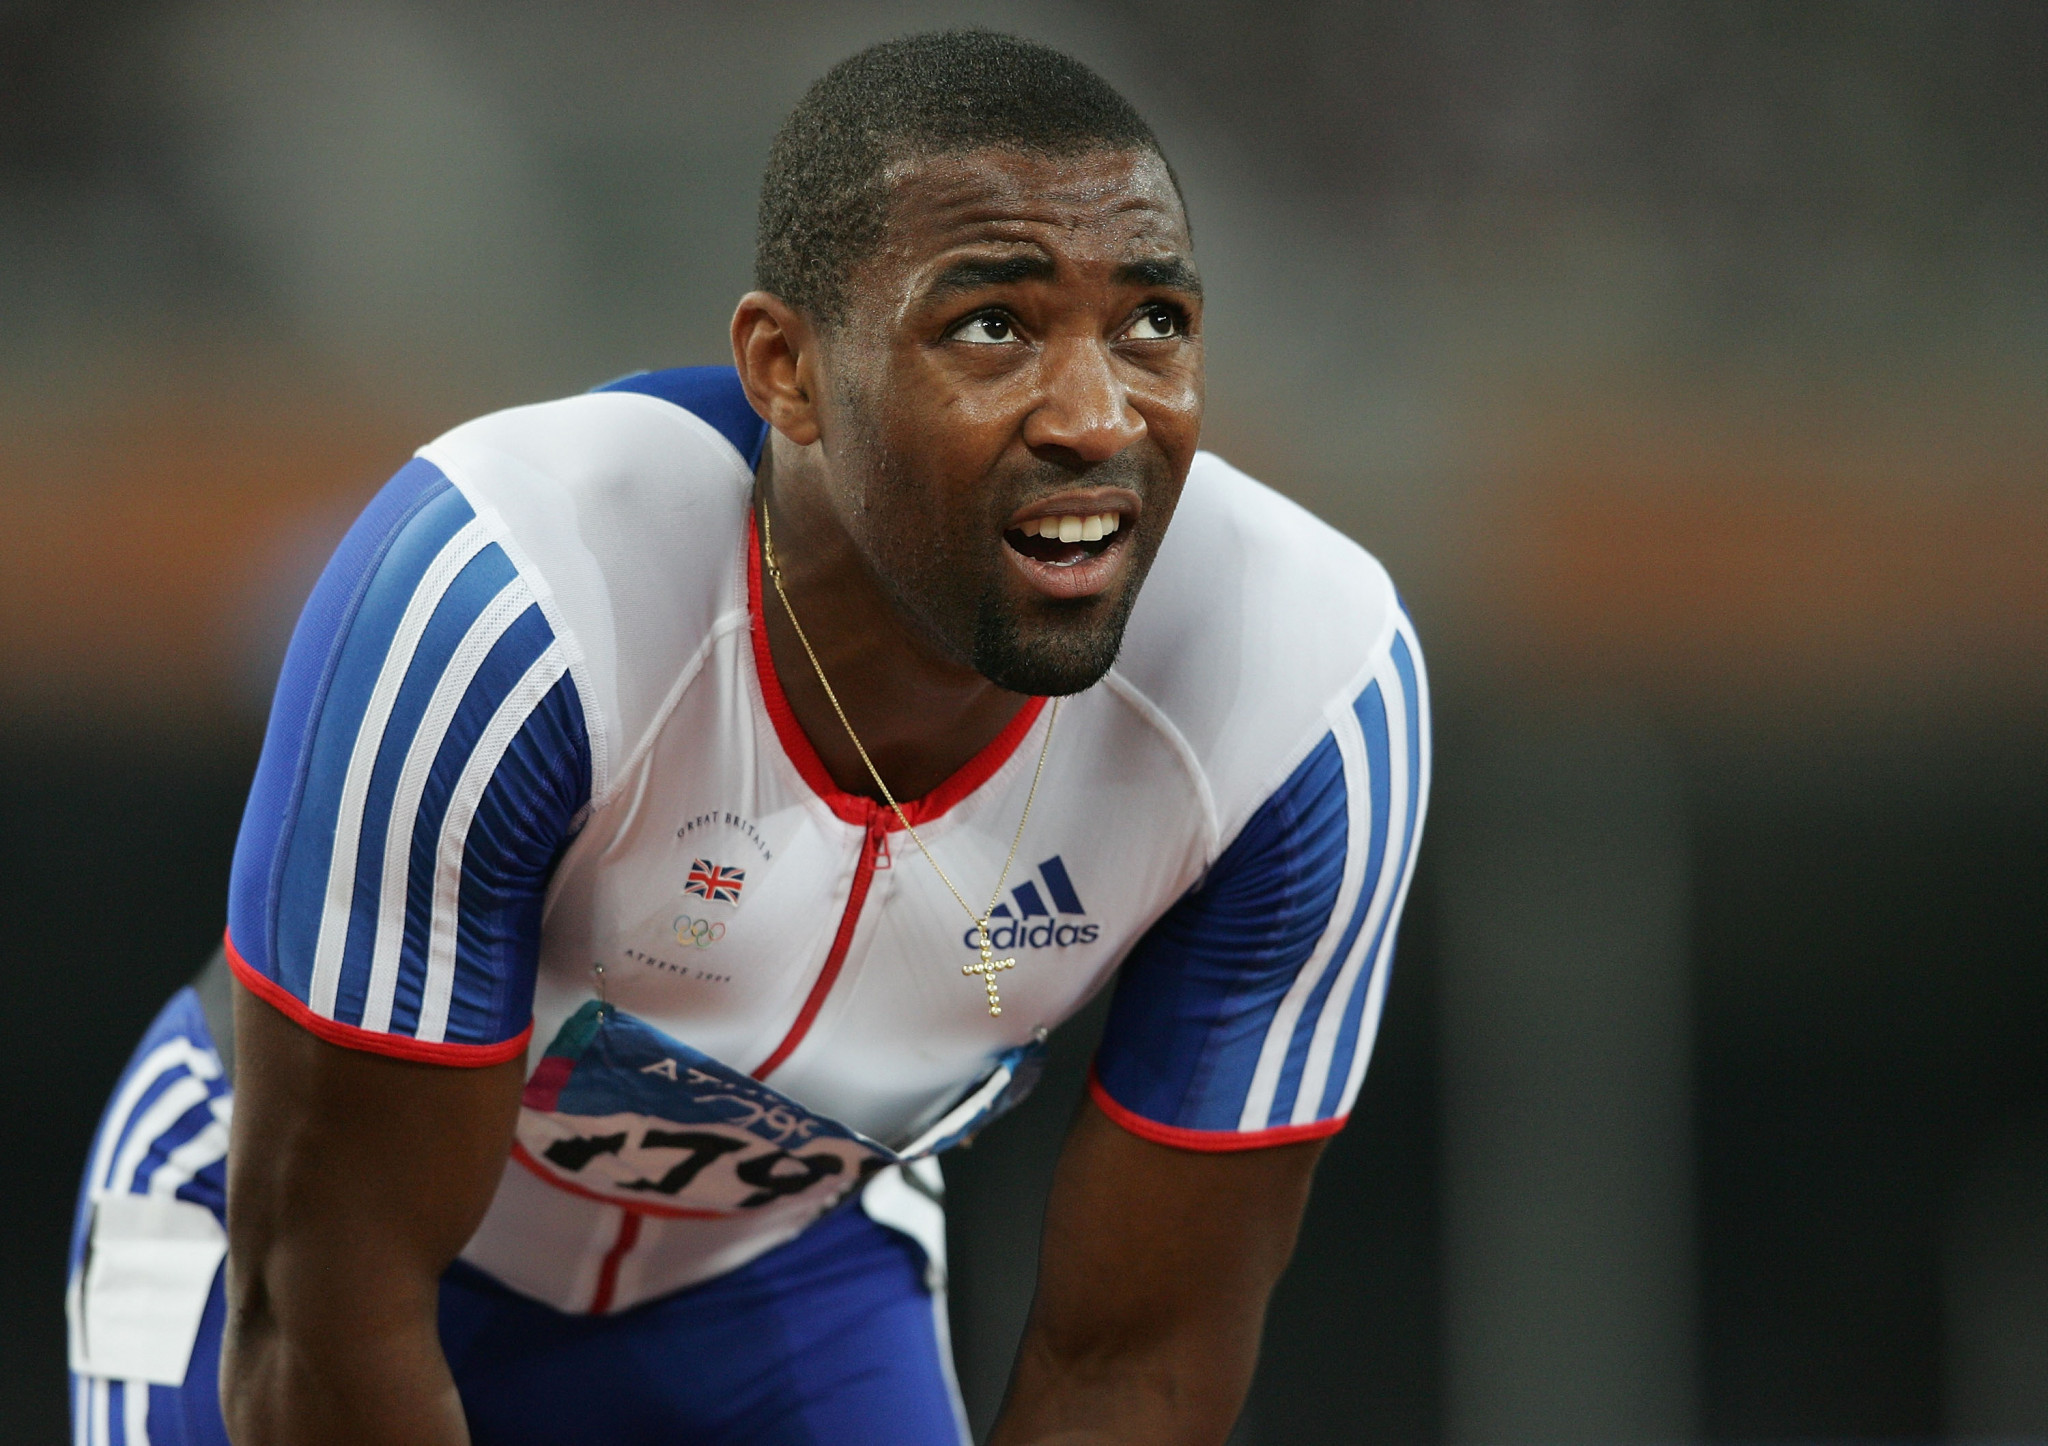 Darren Campbell has been named UK Athletics' head of short sprints and relays ©Getty Images